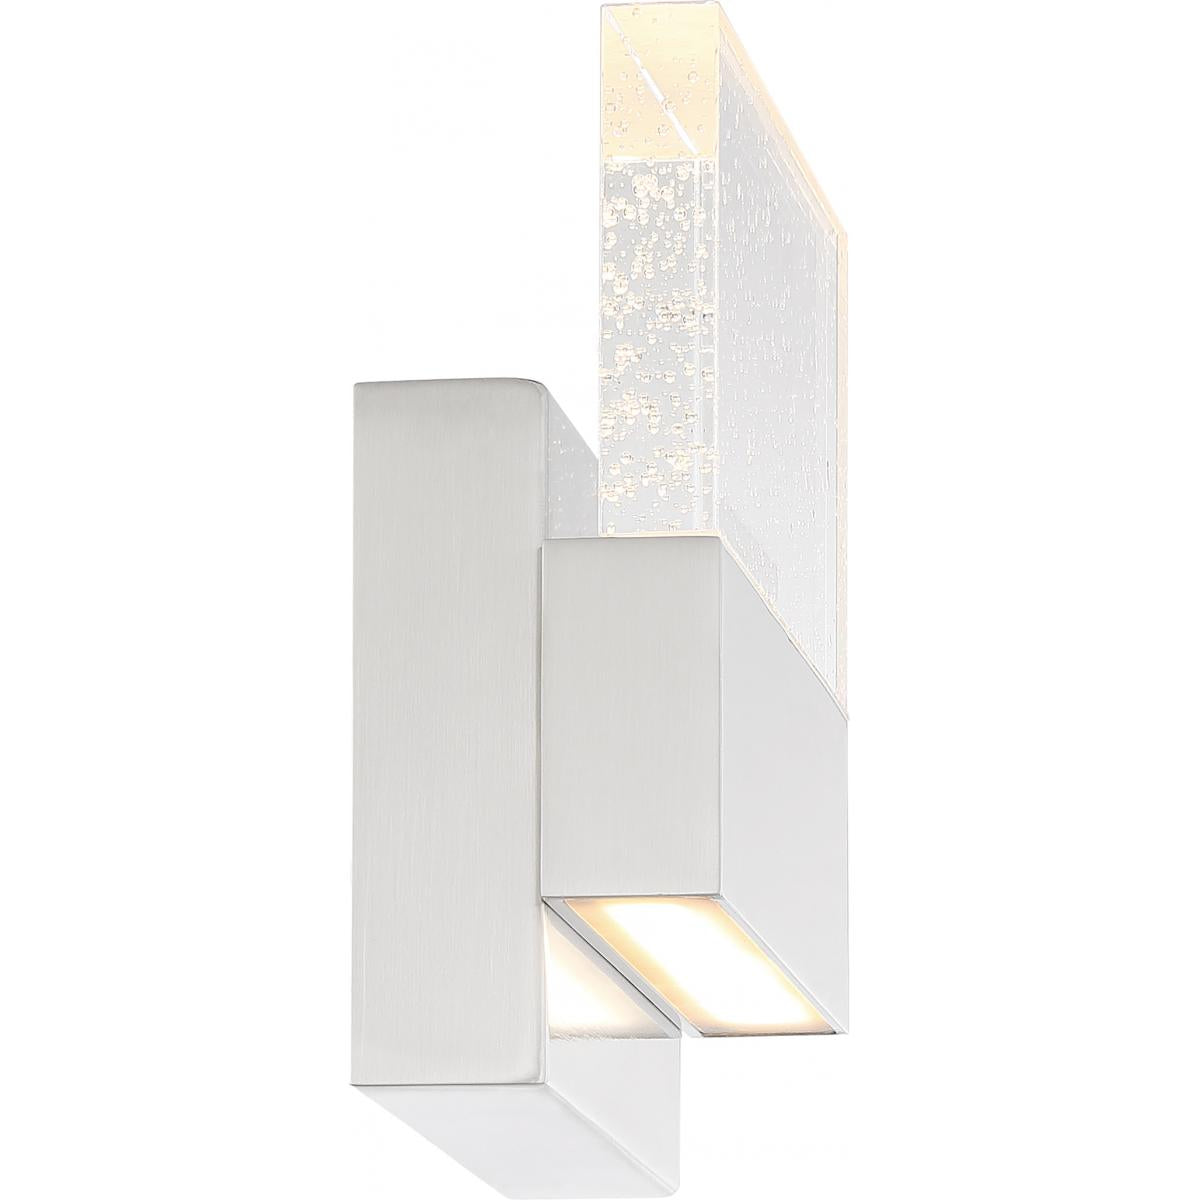 Satco 62-1502 Ellusion LED Medium Wall Sconce 15W Polished Nickel Finish with Seeded Glass